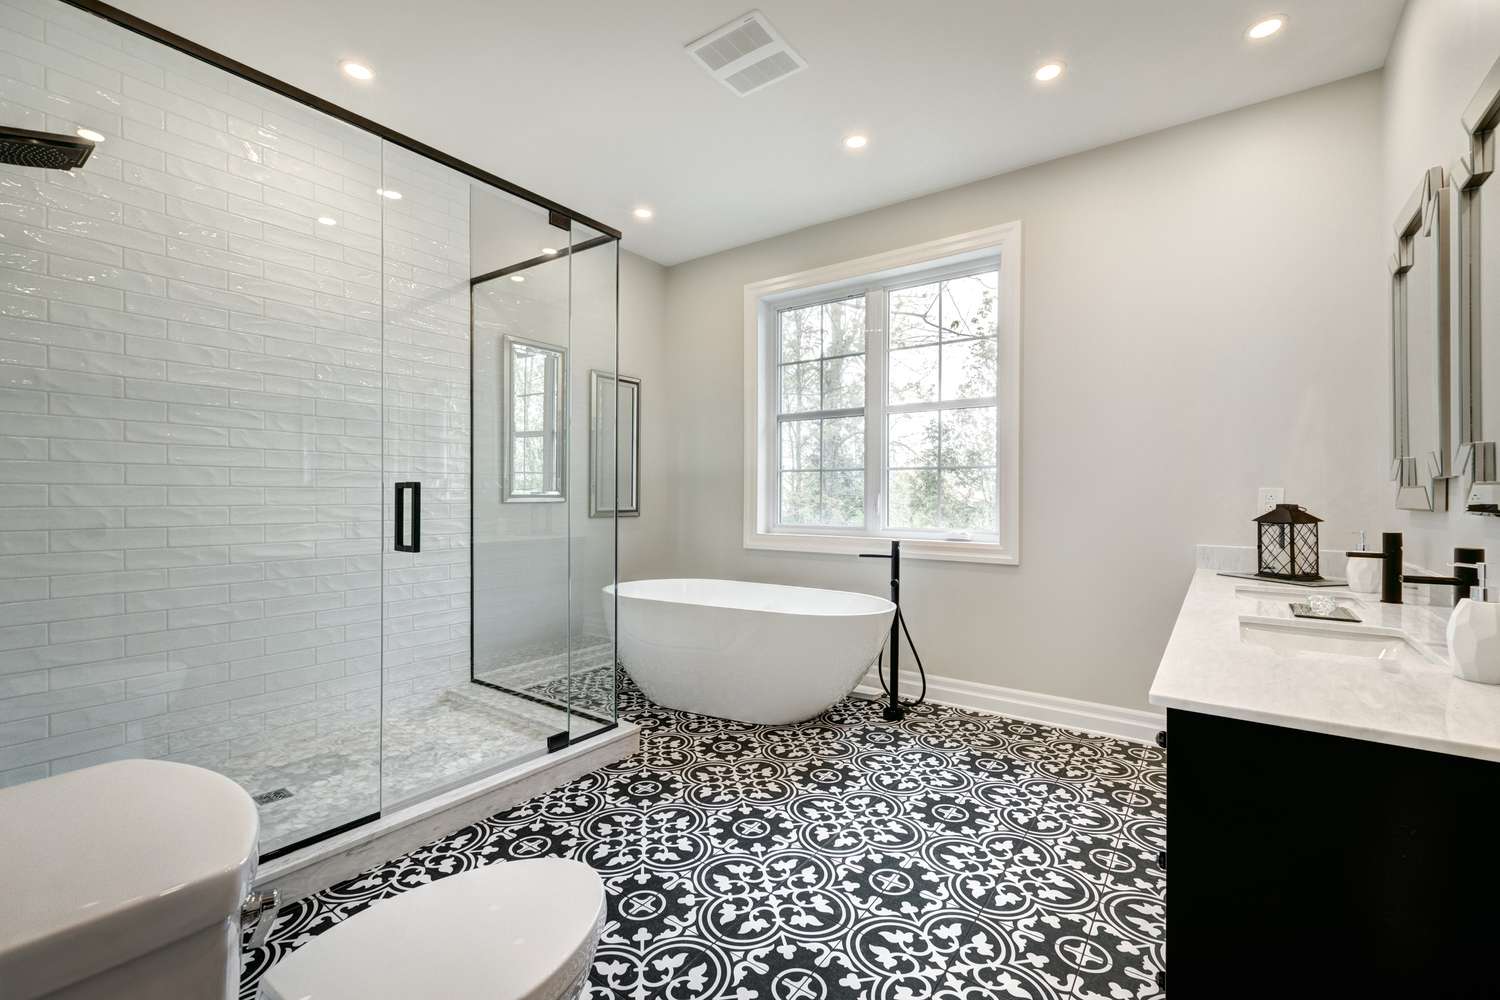 How to Renovate a Bathroom on Low Budget